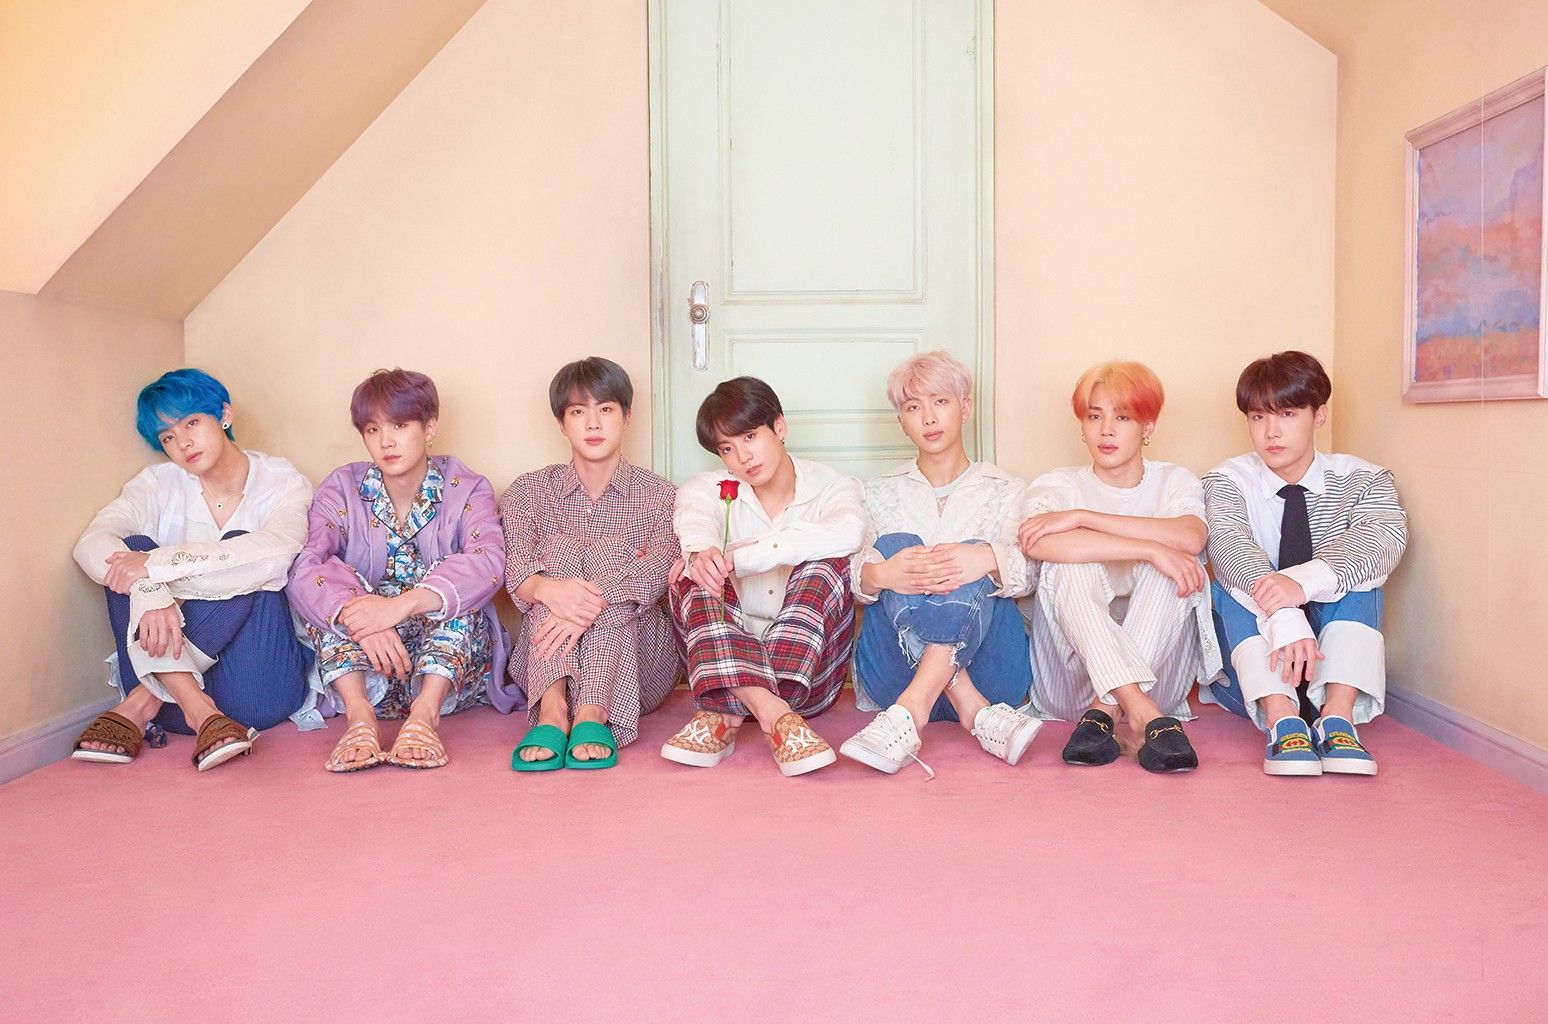 BTS Launches 2019 Anniversary Festa With Opening Ceremony 'Family